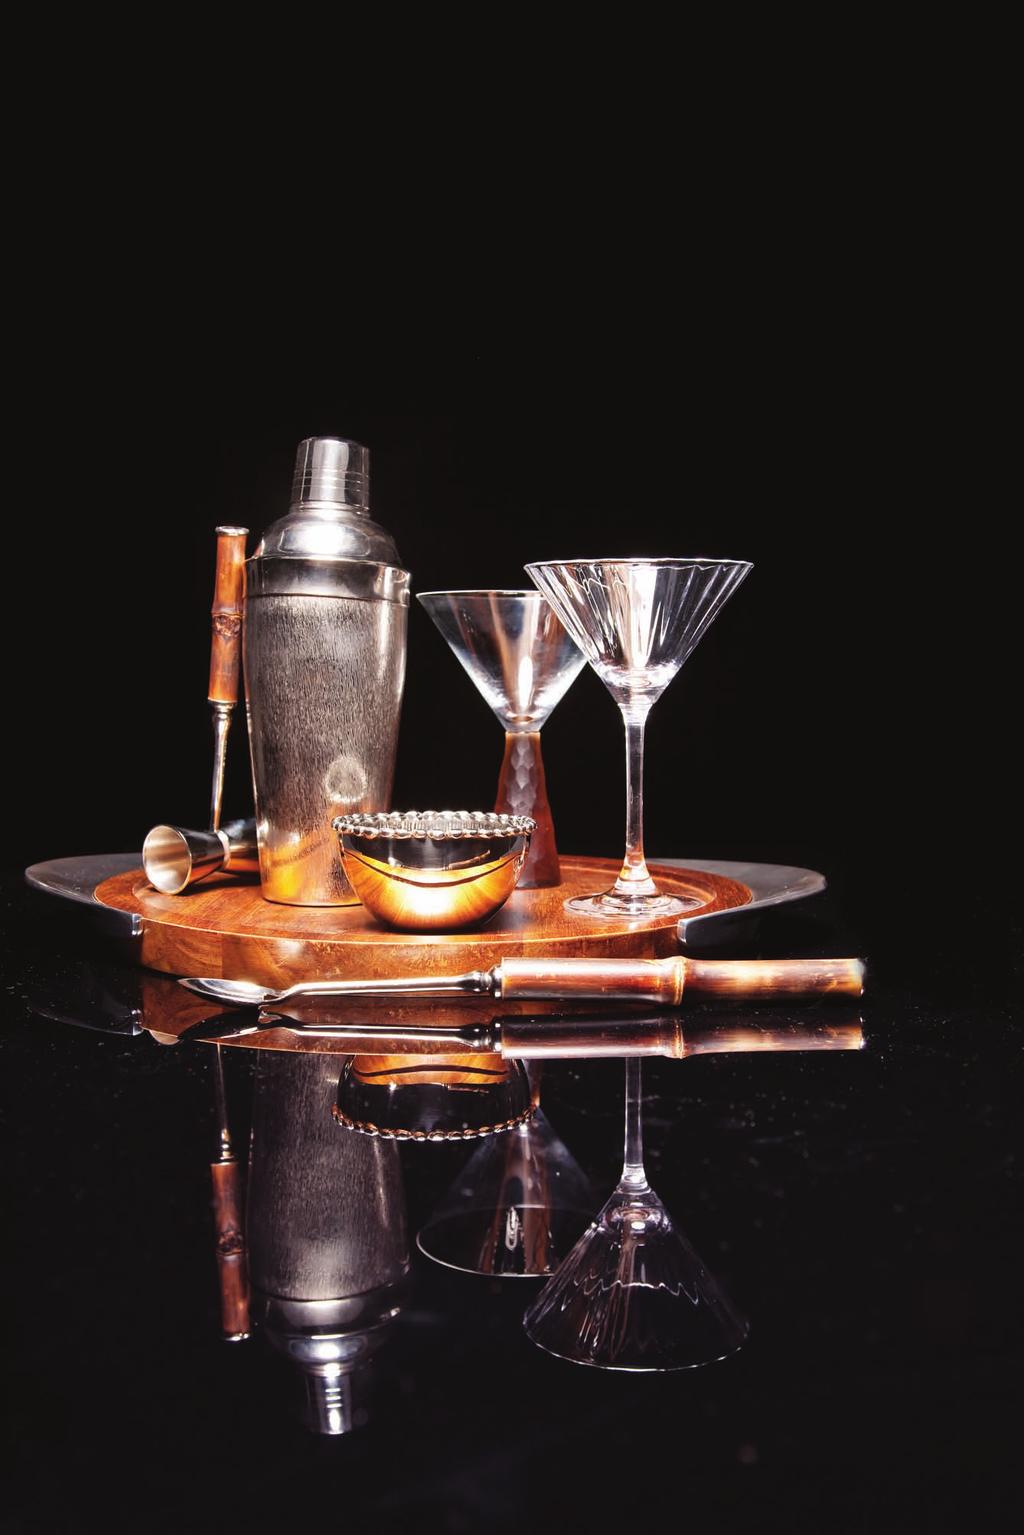 sizzle Photog BY MICHAEL McNAMARA styling by celine hacche and casey hagarty ANevening Shake up a beautiful martini and enjoy a relaxing evening at home IN 2 3 1. Zodax bar tools, $36 at Occasions!